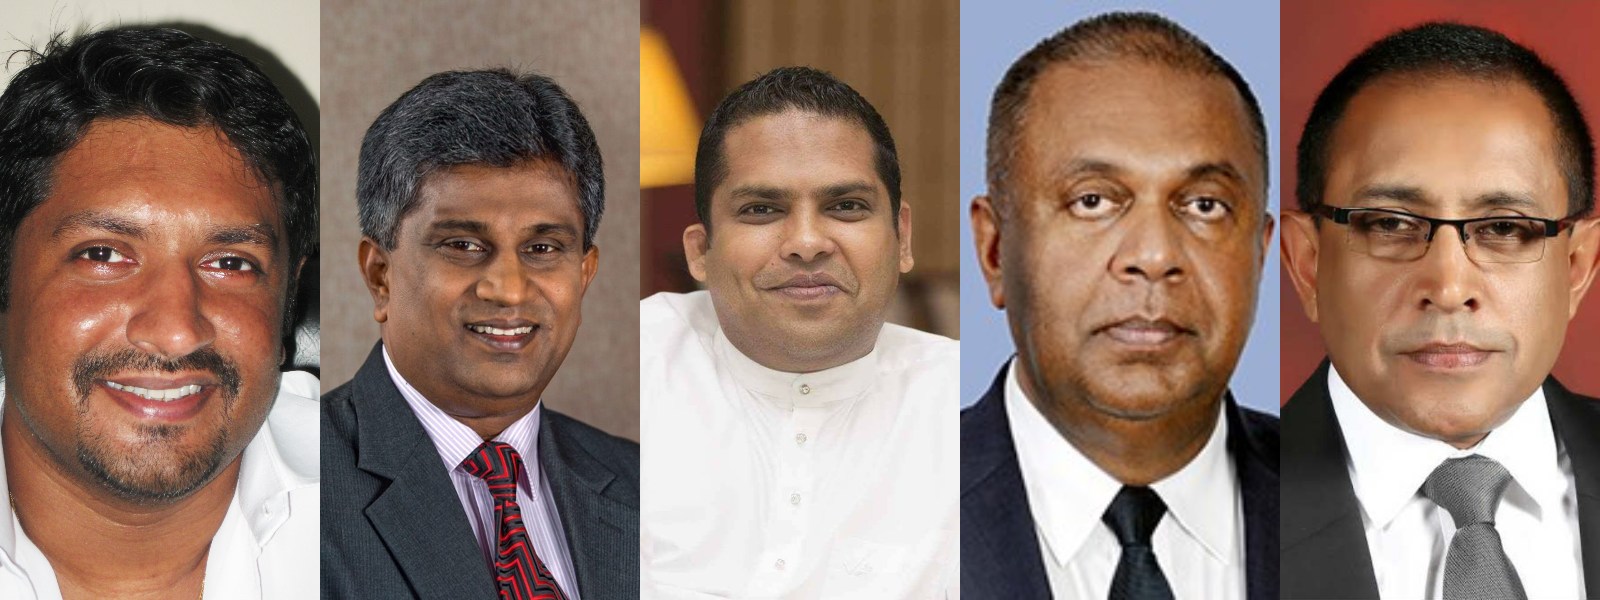 8 Ministers have stepped down from their positions so far